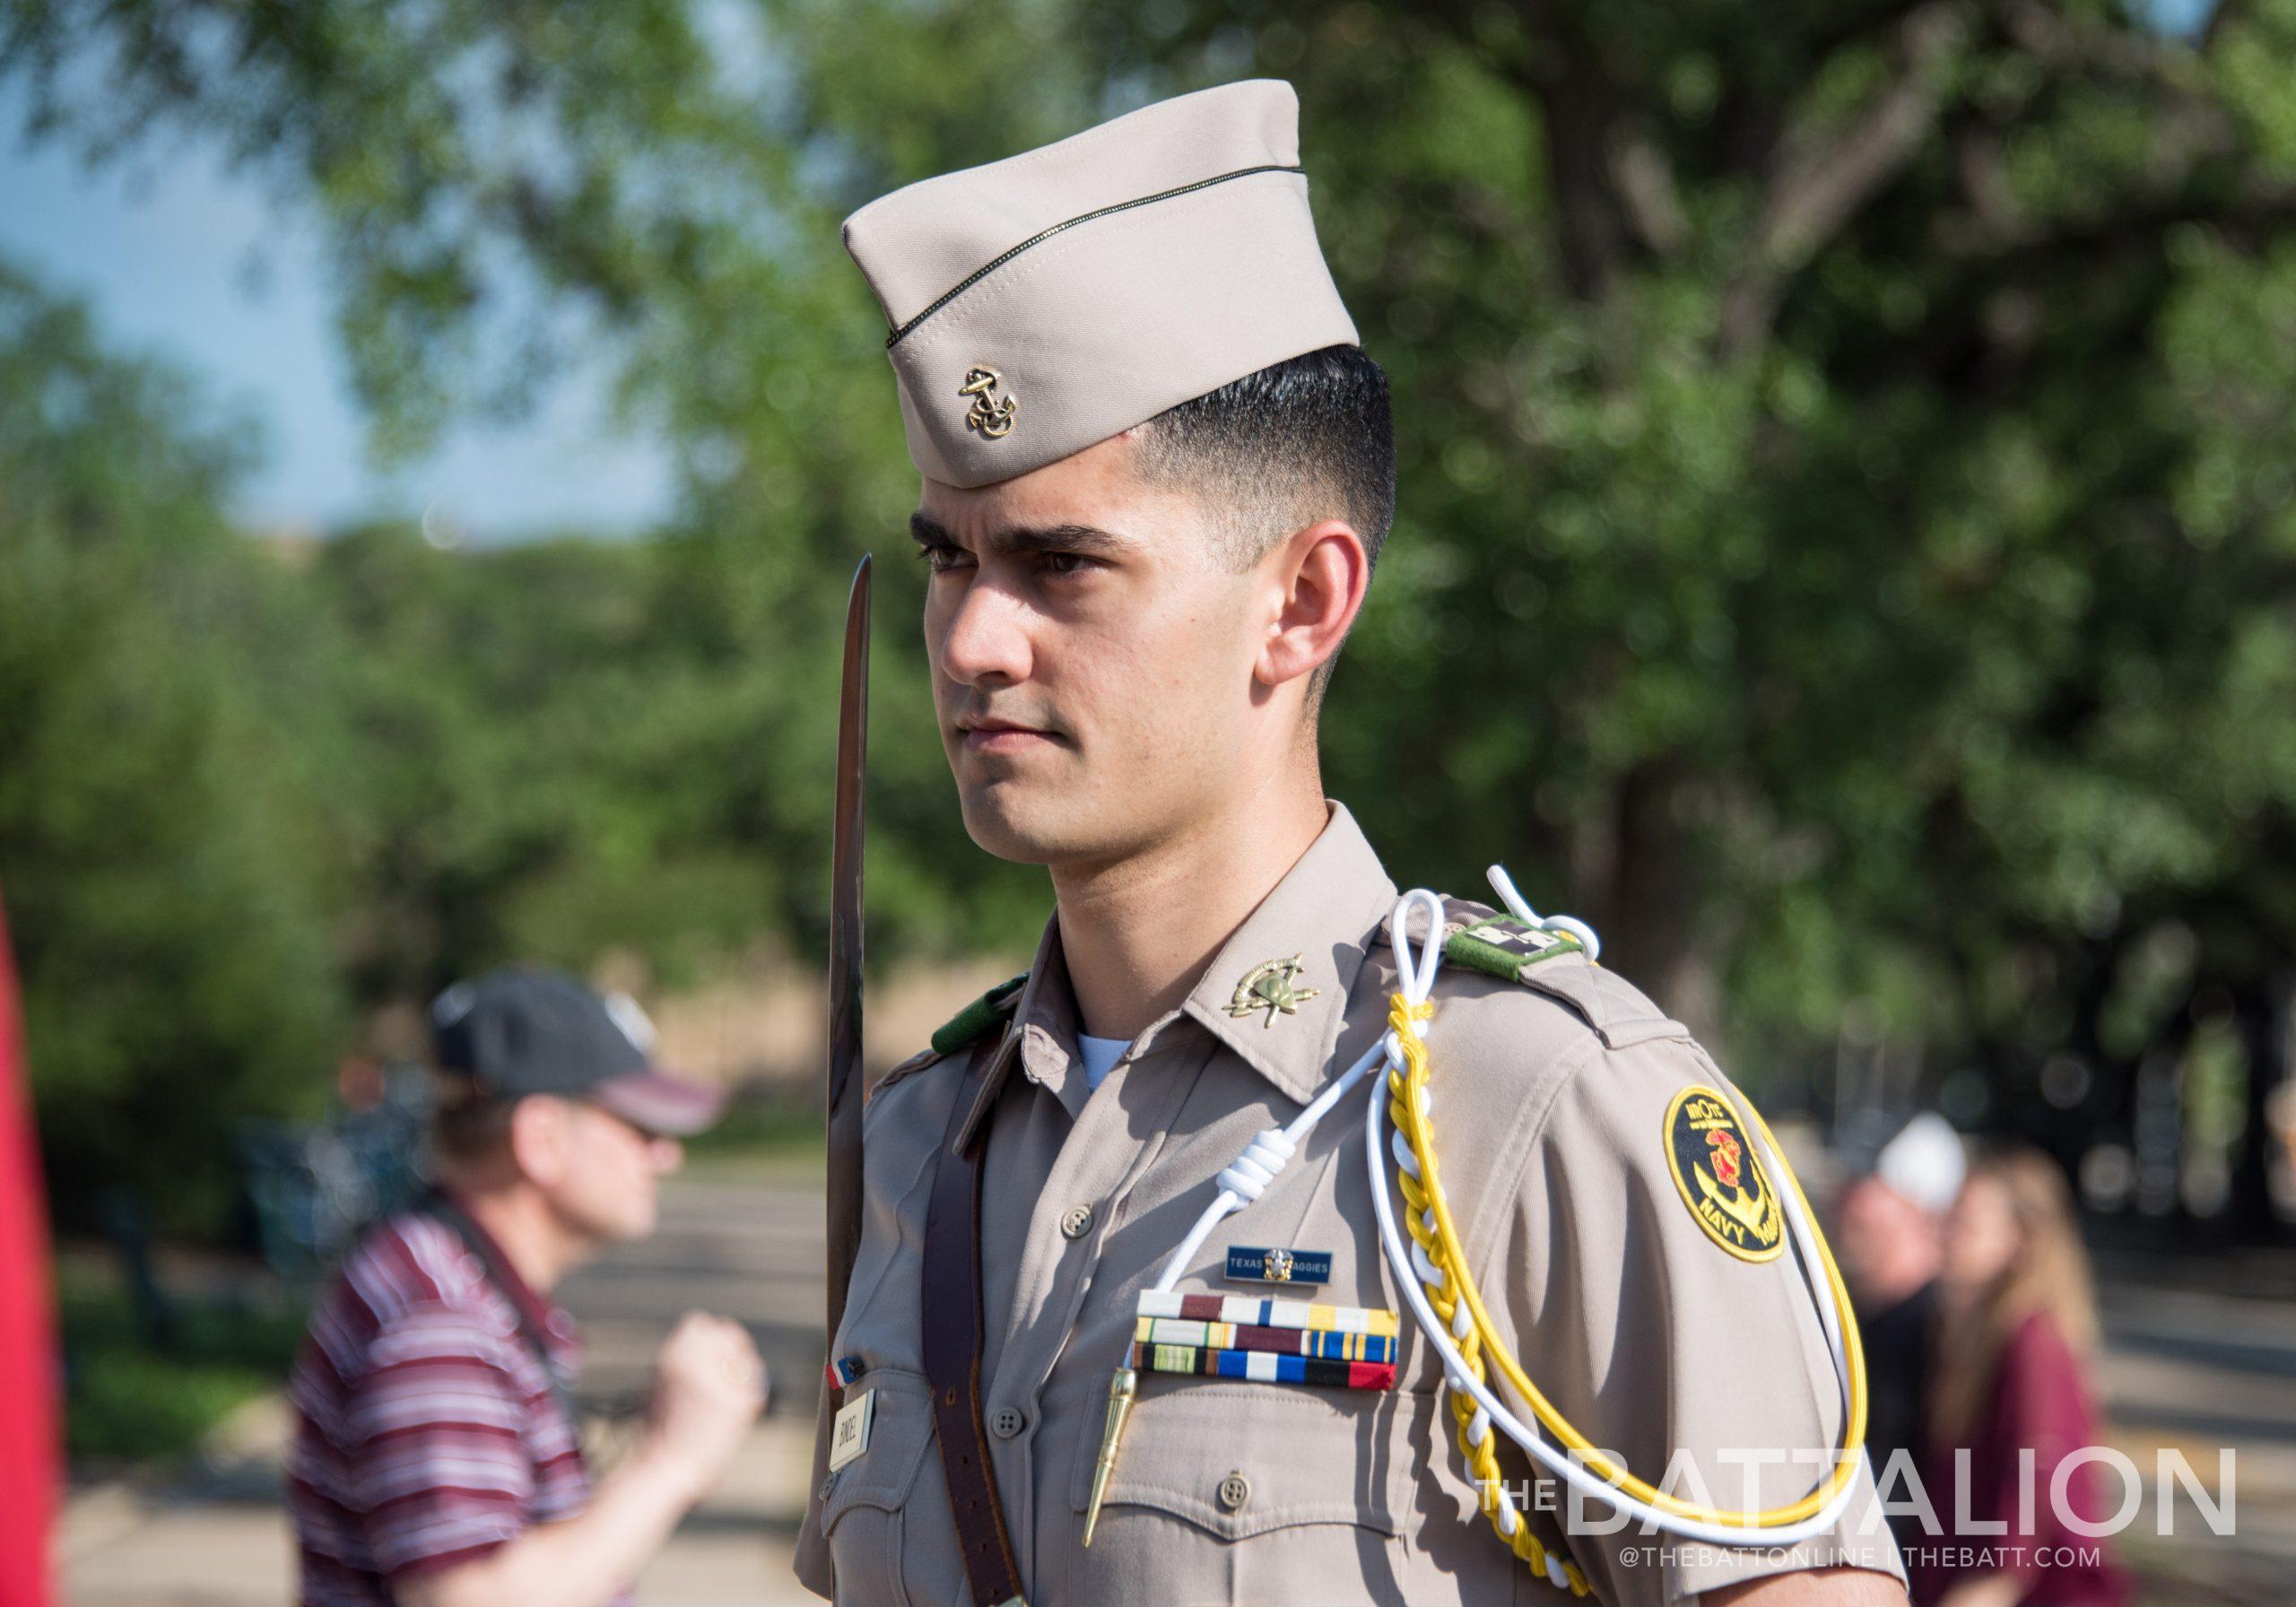 Cadets+joining+the+military+reflect+on+A%26M+history+of+service